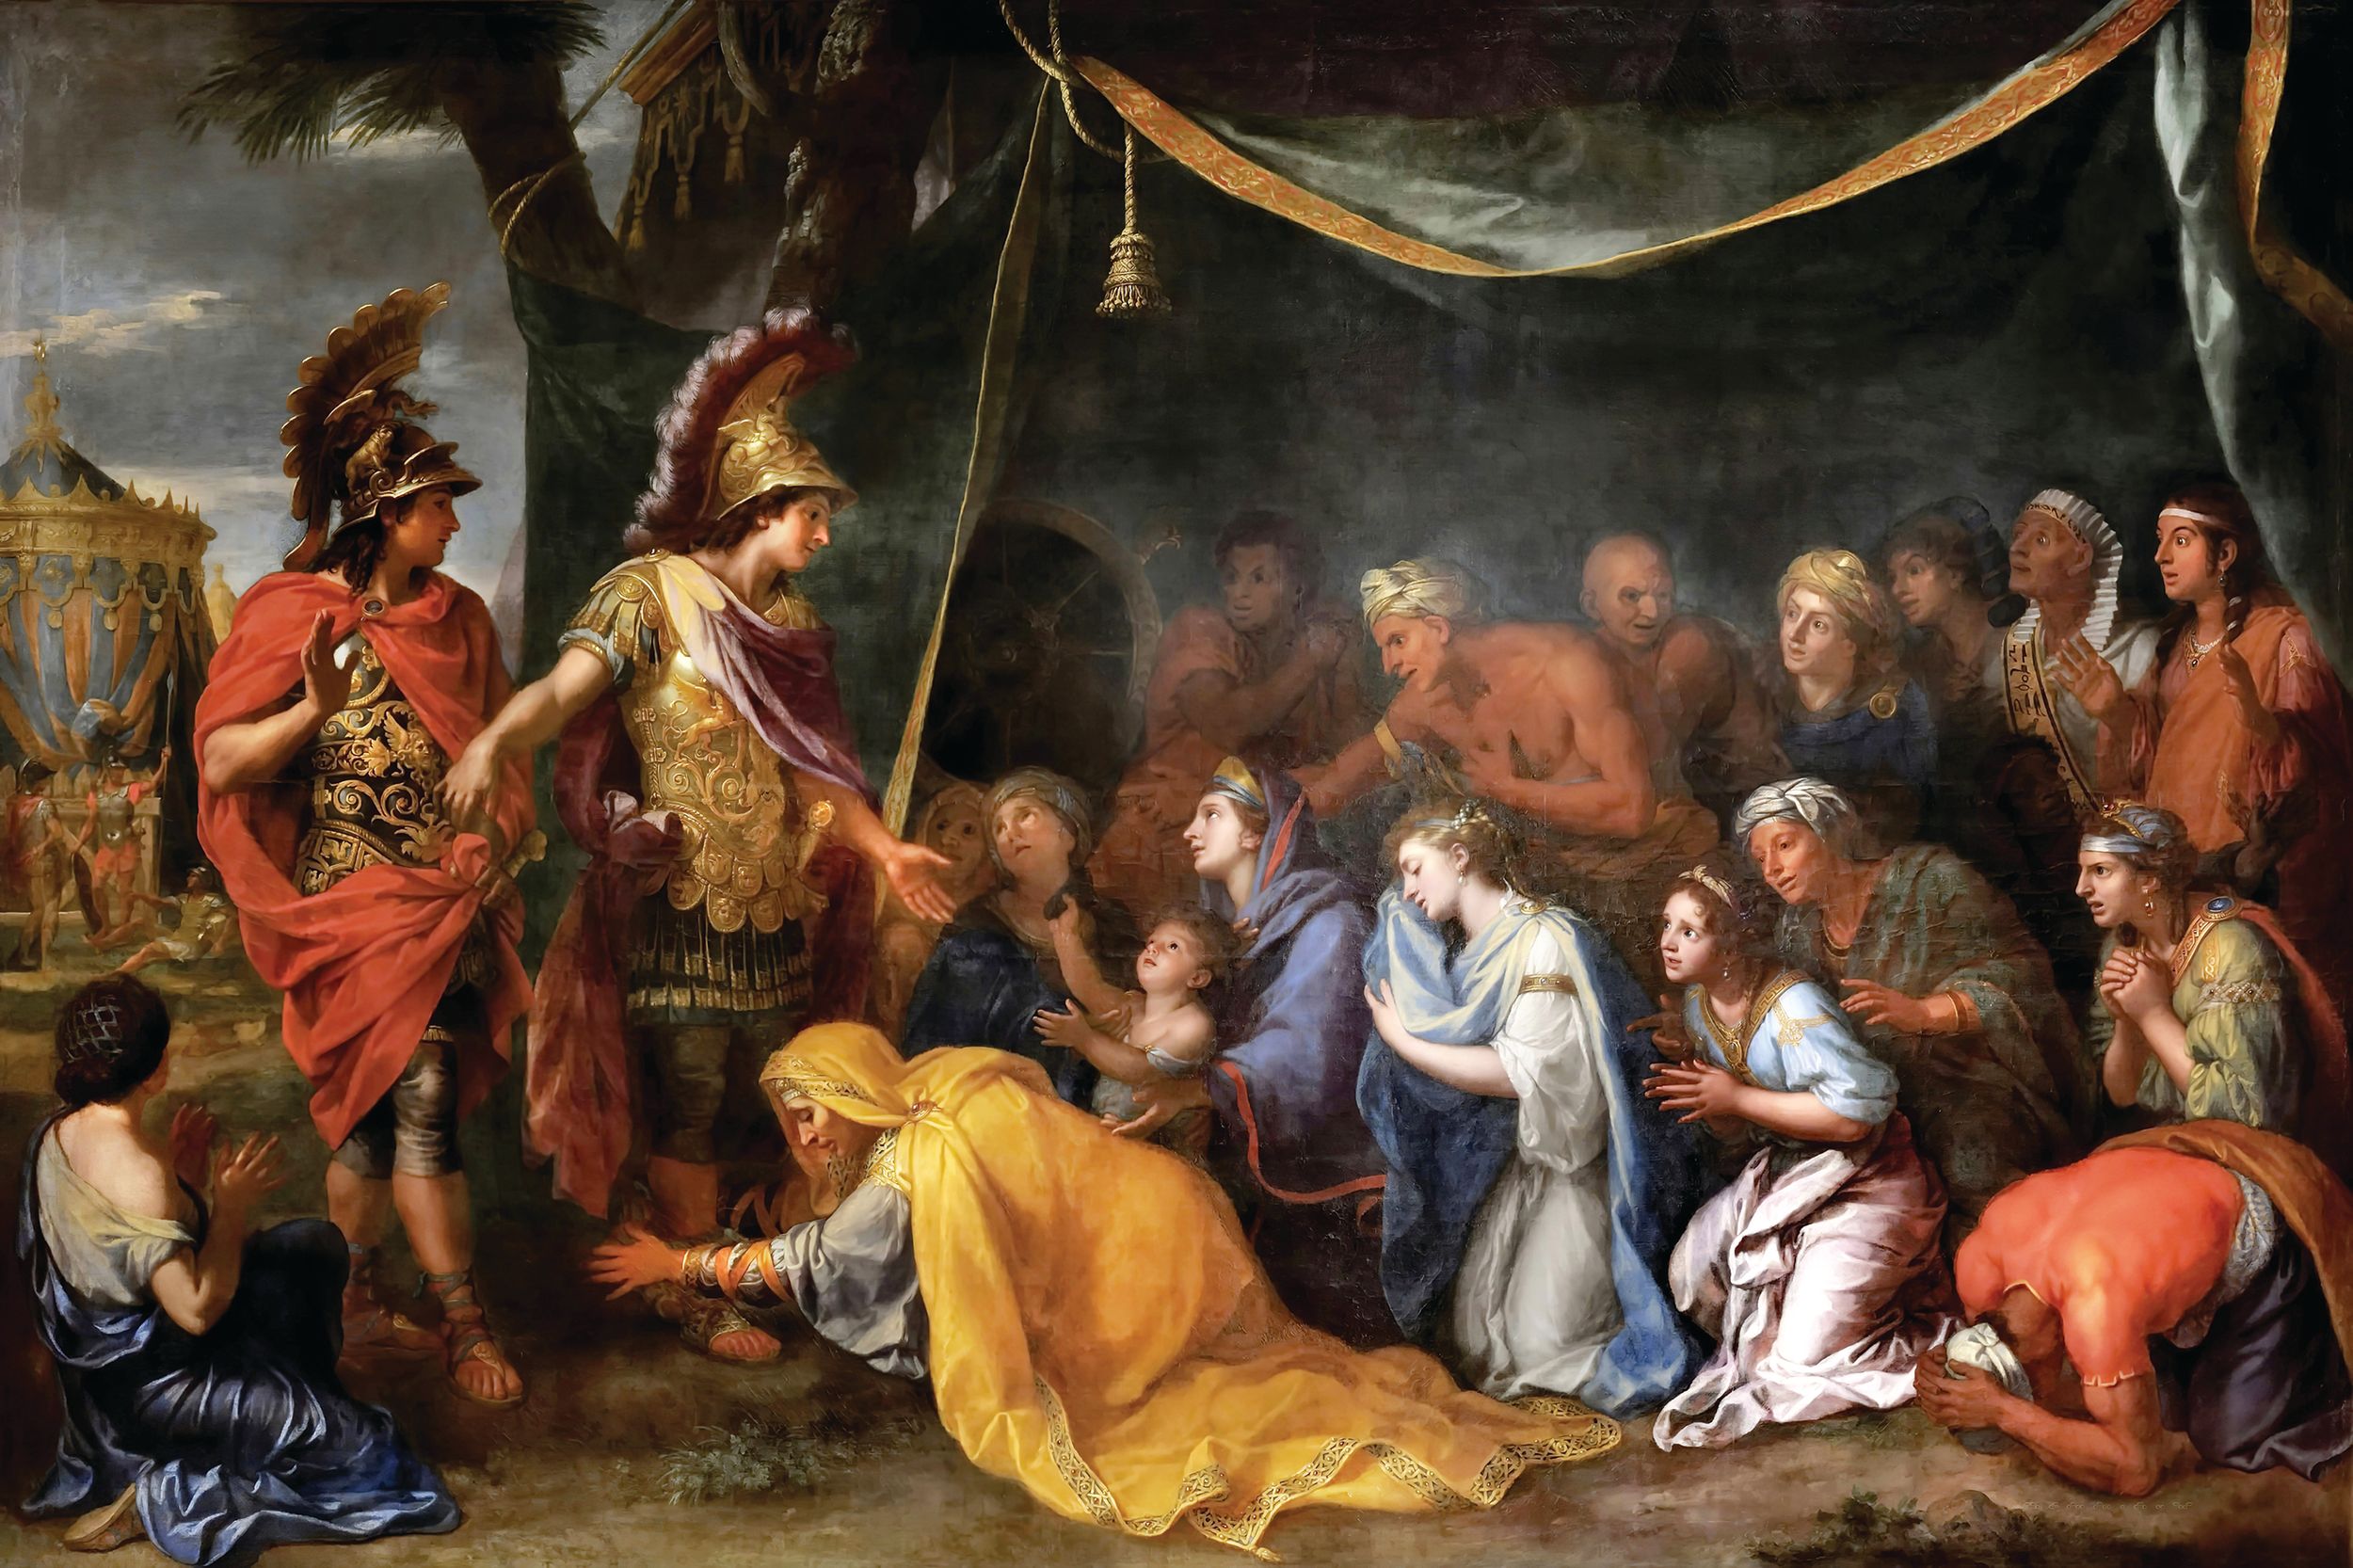 After the collapse of his army at the Battle of Issus, Darius fled, leaving behind his wife, daughters Stateira and Drypetis, and his mother, Sisygambis. Alexander was said to have treated the captured women with great respect, and Stateira later became Alexander’s second wife.